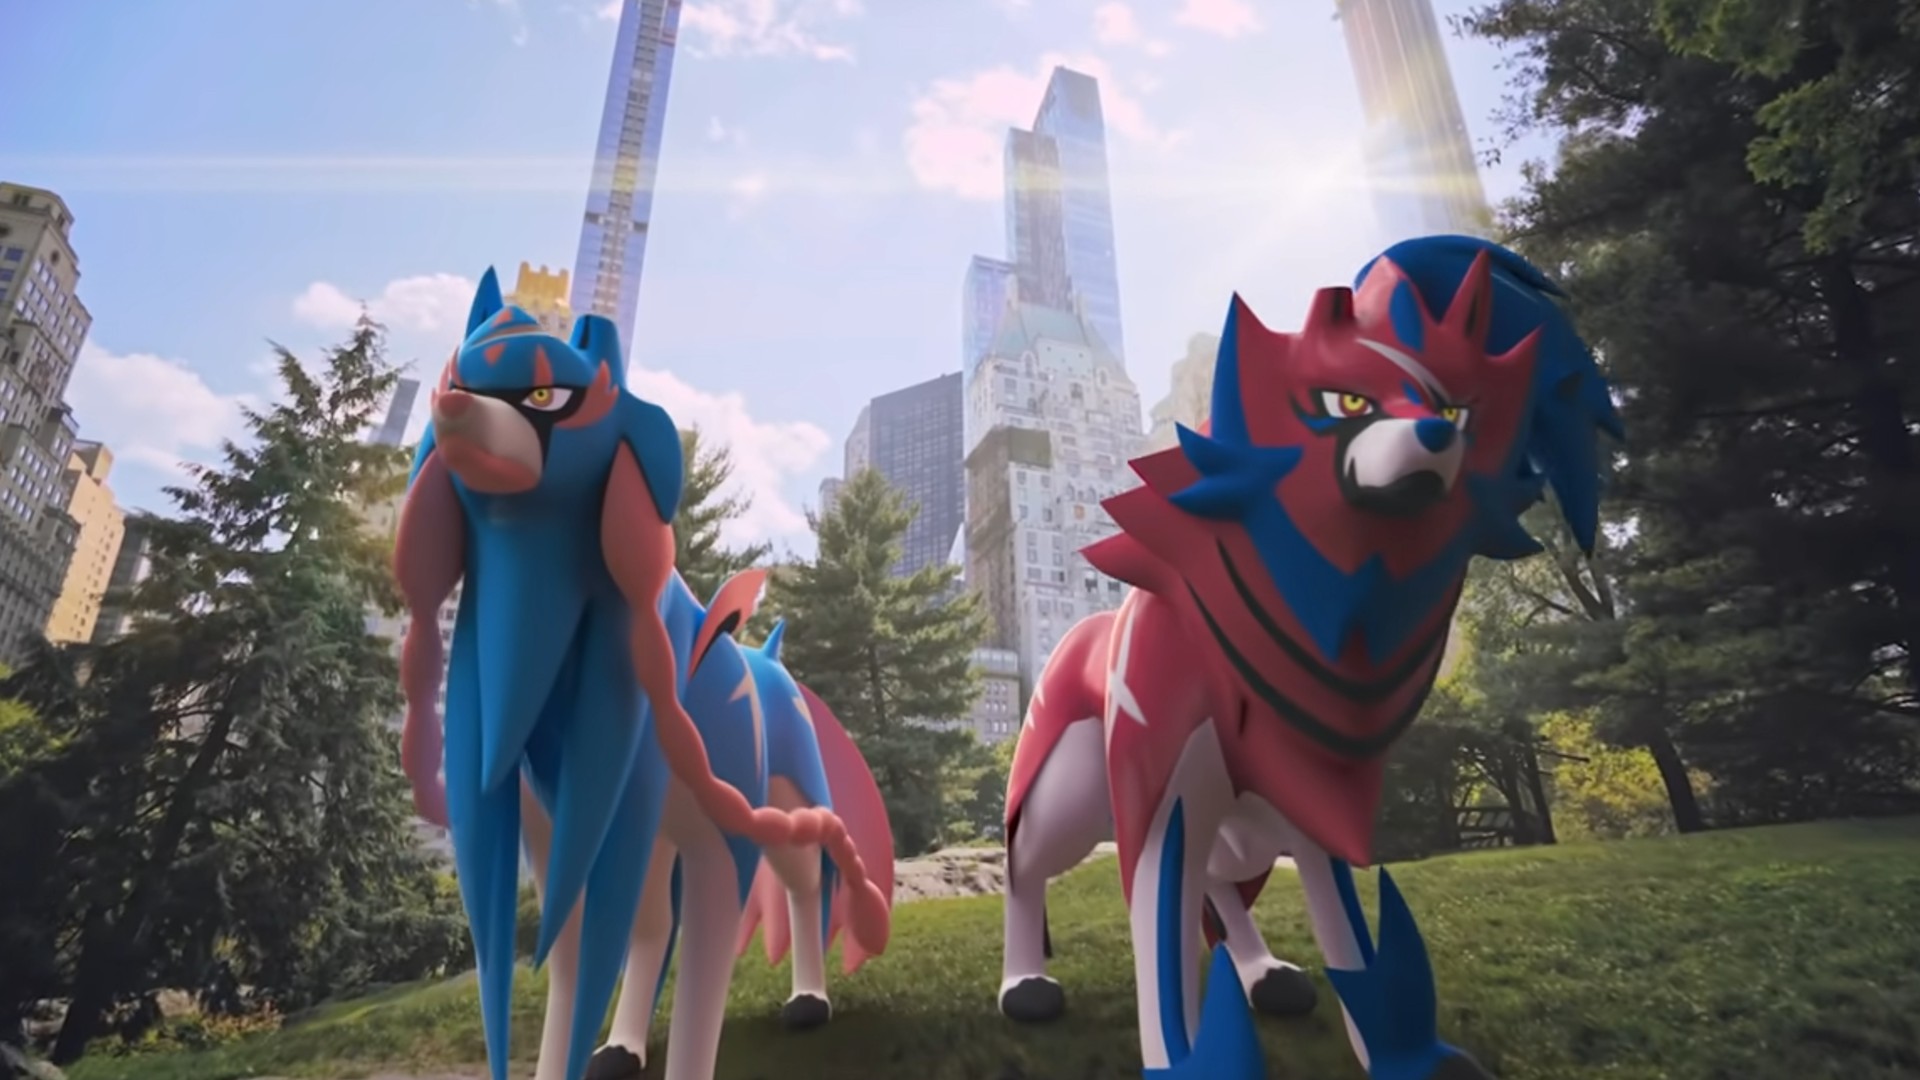 Pokémon Go Zacian counters, weaknesses and moveset explained